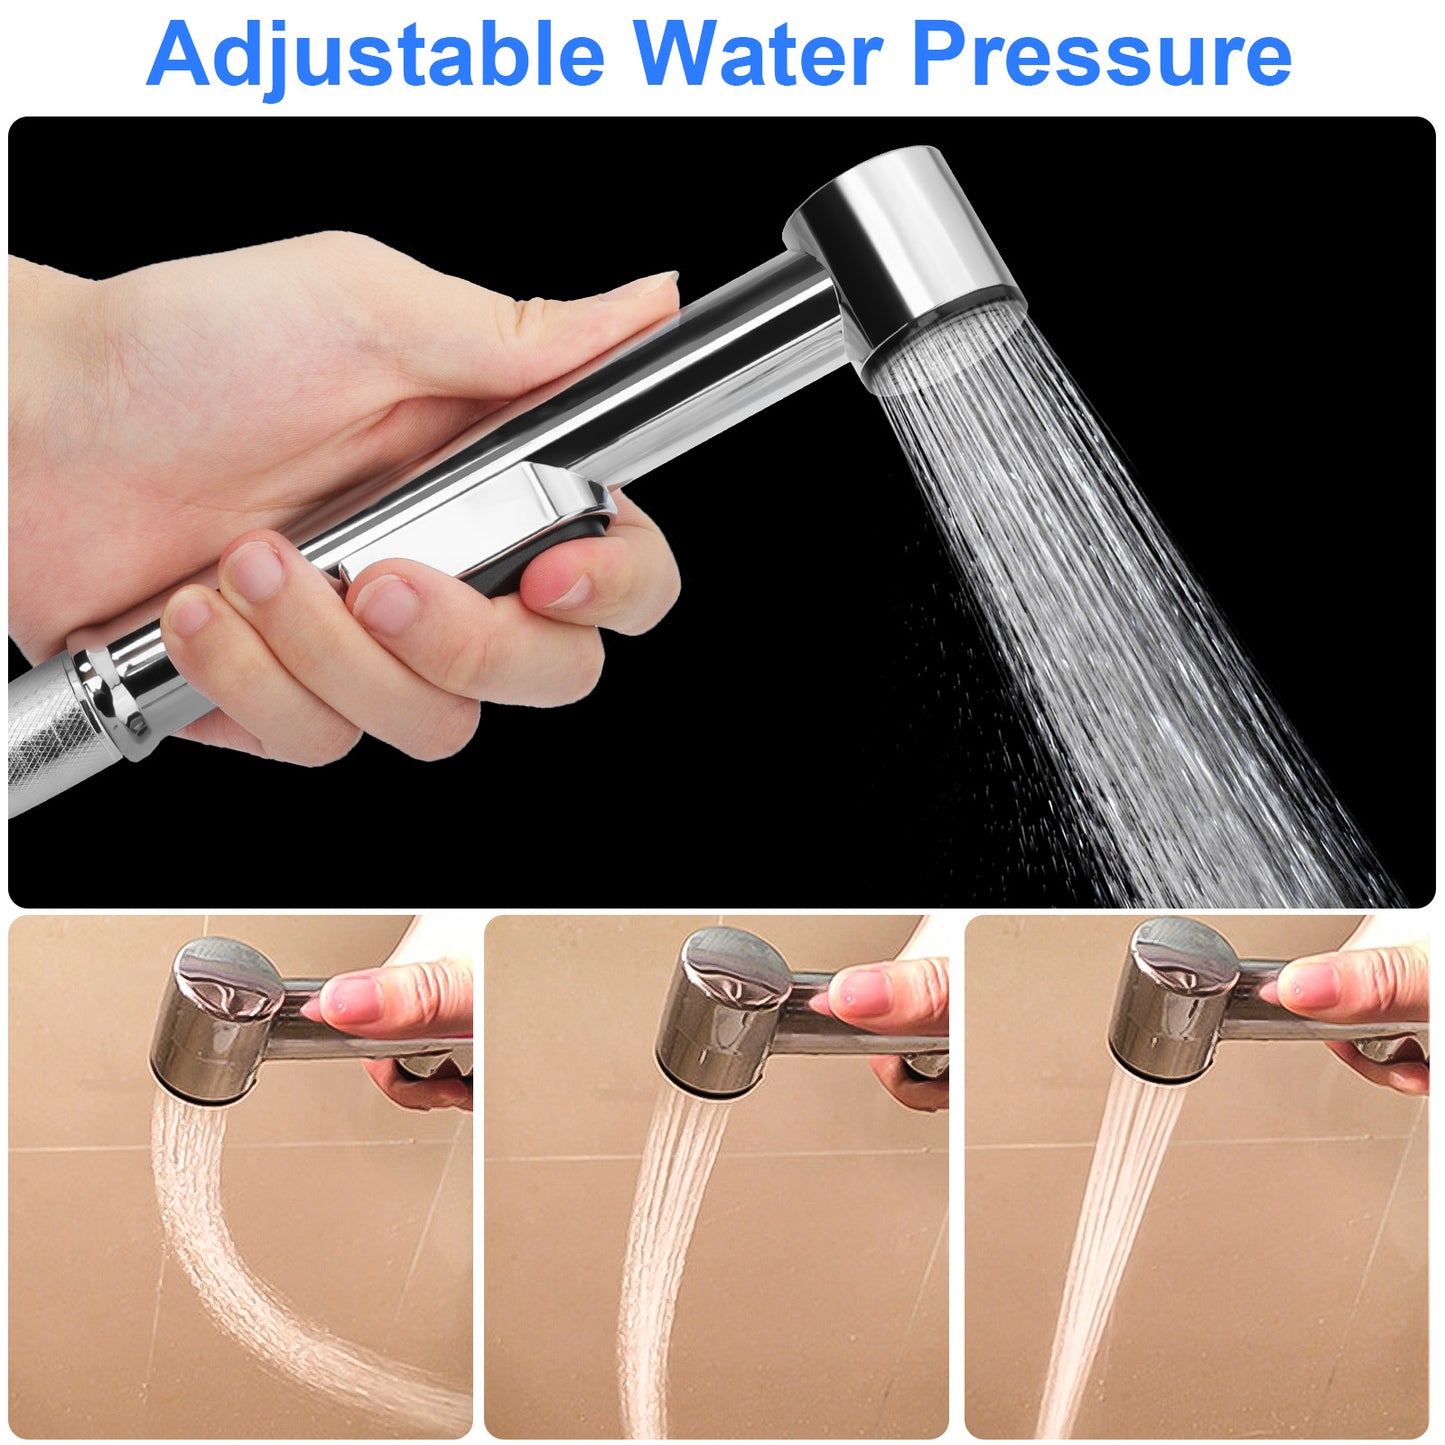 Handheld Bidet Toilet Sprayer Kit - Stainless Steel Hose and Wall Mount Options for Personal Hygiene, Bathroom Cleaning, Pet Care